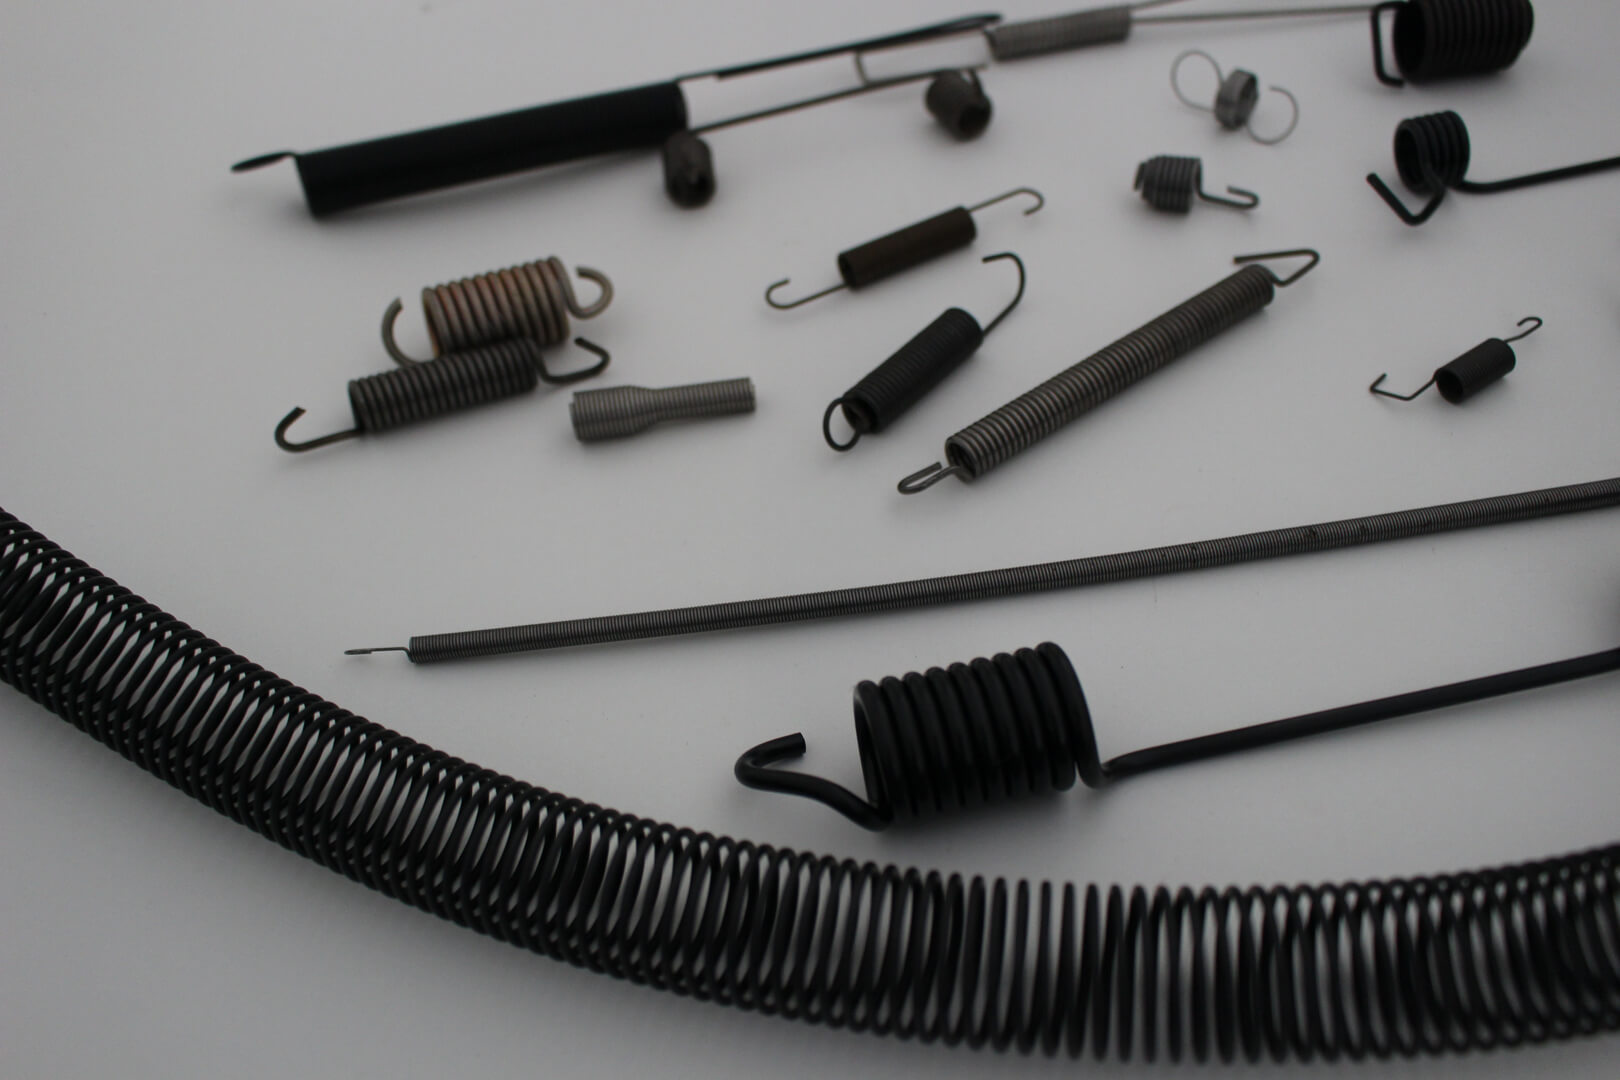 Extension springs of all sizes and types made by Timac Spring Manufacturing, Inc. - Xenia, OH